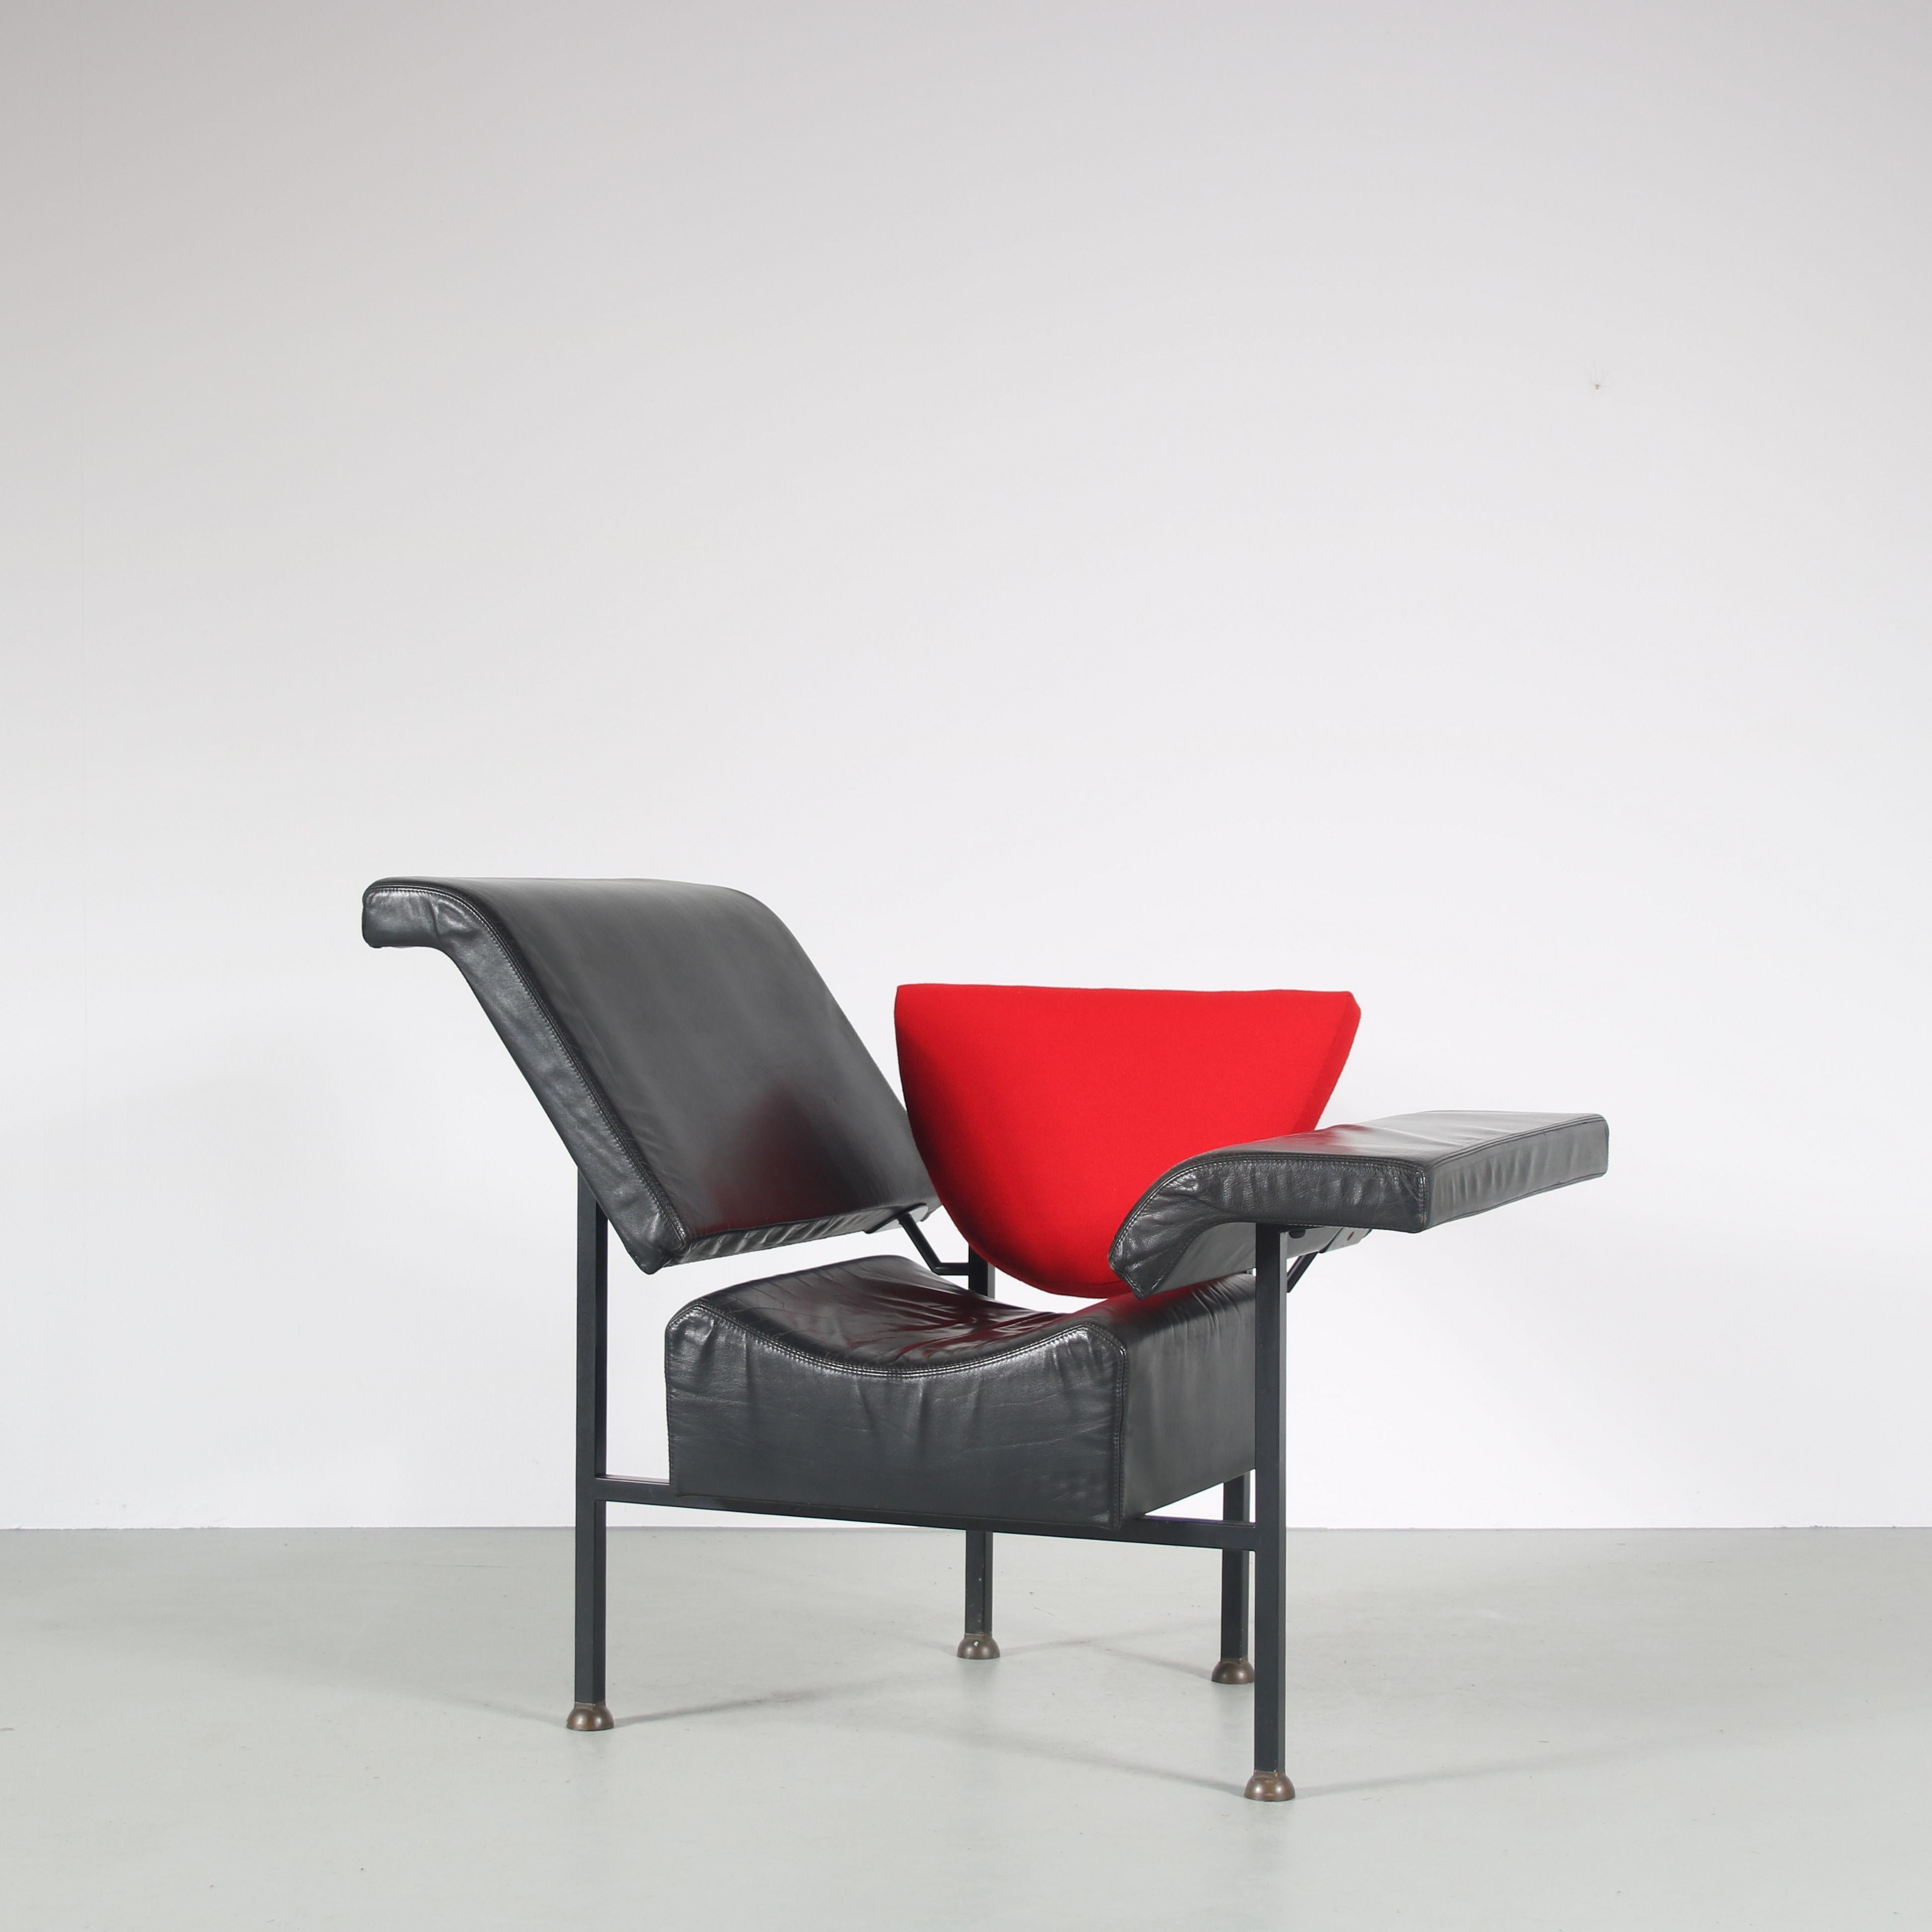 The “Groeten uit Holland” (Greetings from Holland) chair is an iconic design by Rob Eckhardt, manufactured by Pastoe in the Netherlands around 1980.

Inspired by the Dutch tulip, this asymmetrical chair has an eye-catching style! It is upholstered